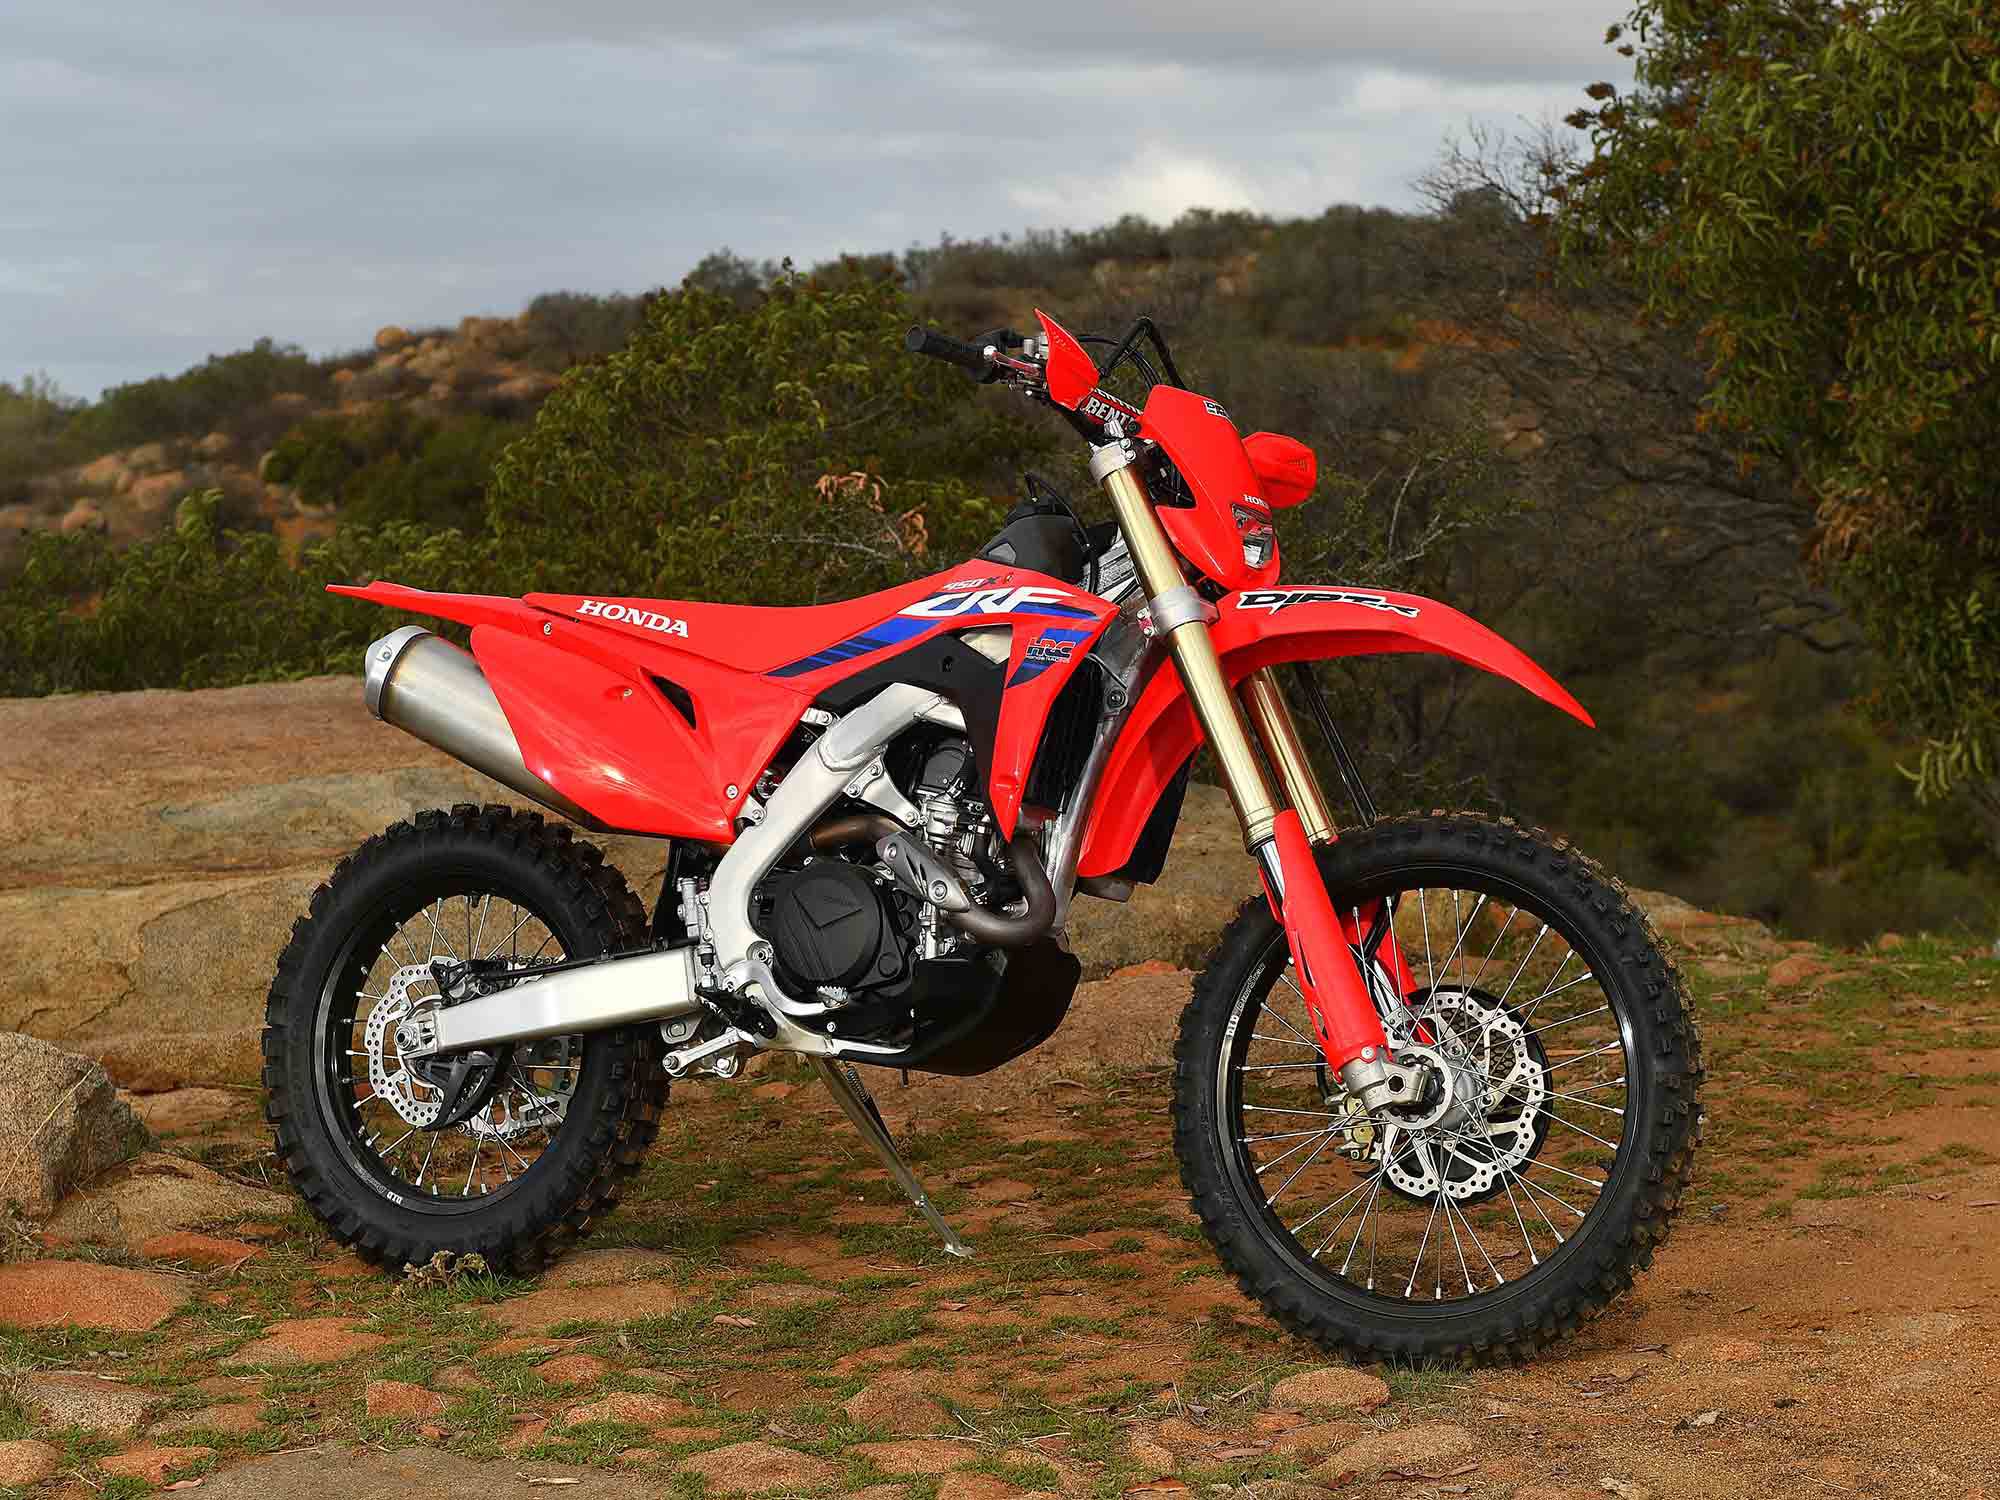 Right-side beauty shot in its natural habitat. New graphics for 2023 and updated HRC logo make this year’s CRF450X one of the cleanest designs in recent memory.